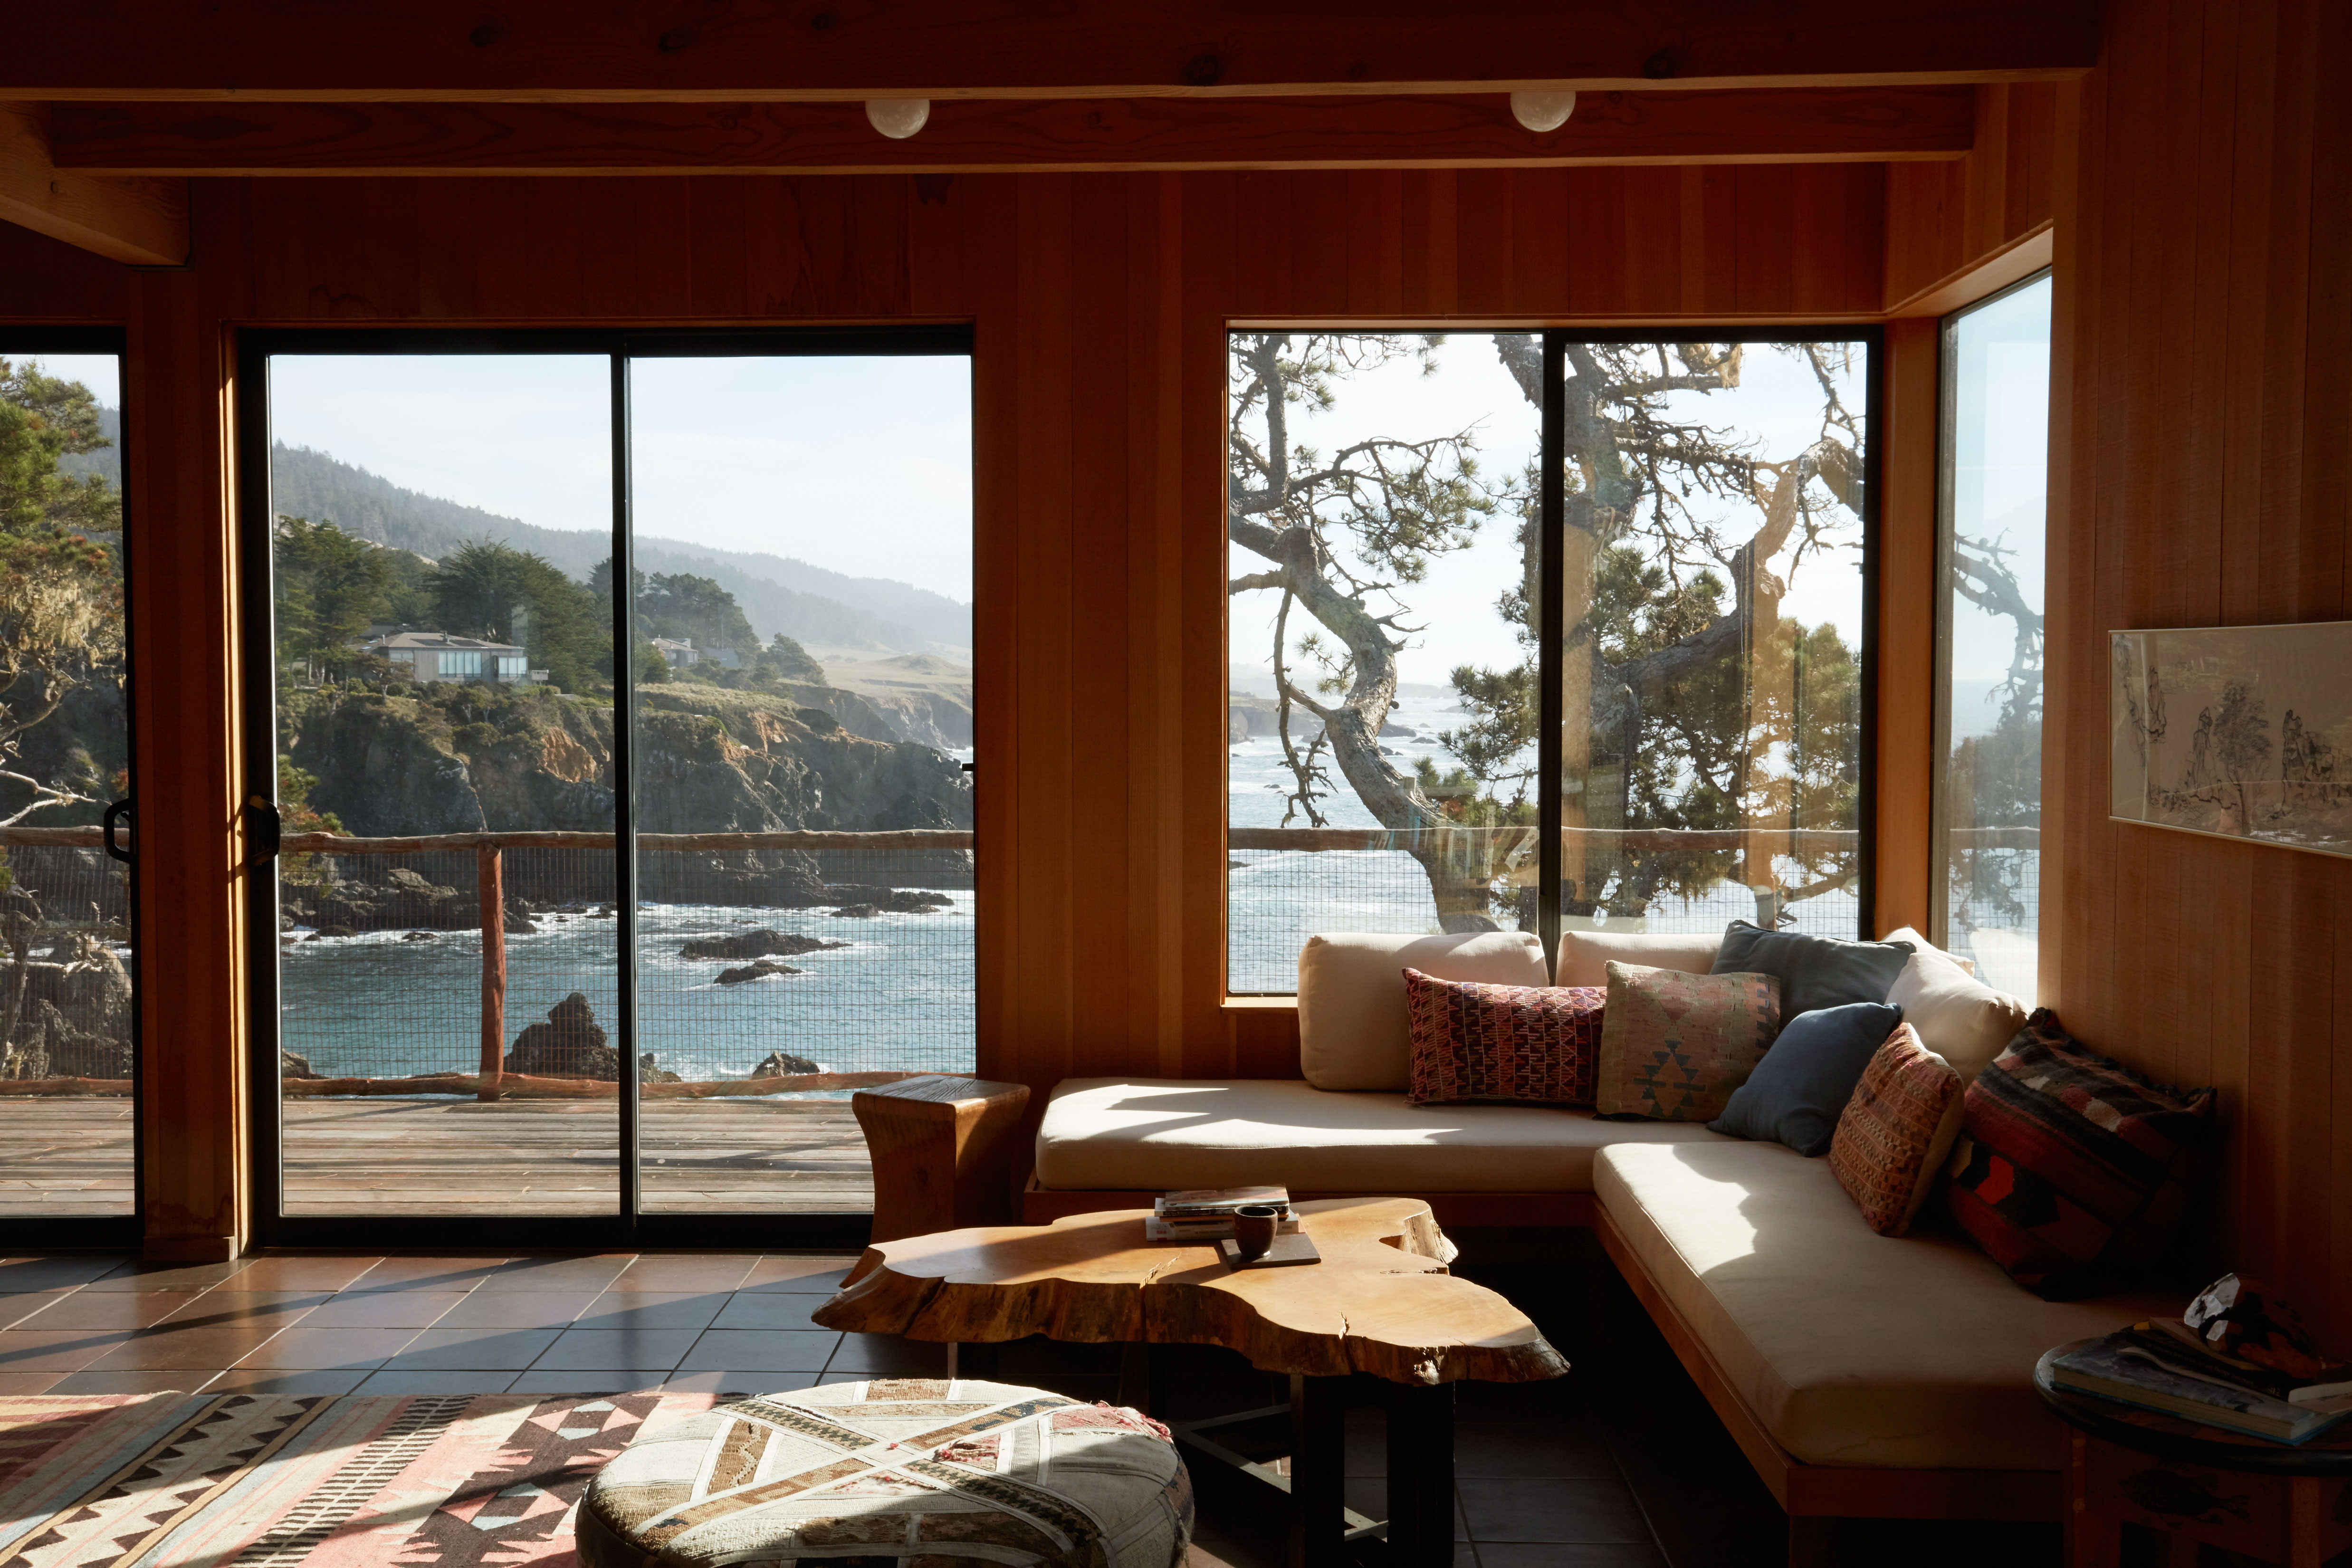 A living room overlooking the sea and some cliffs containers an L-shaped bench with 10 throw pillows. There is also a rustic, wooden coffee table and a geometric rug.